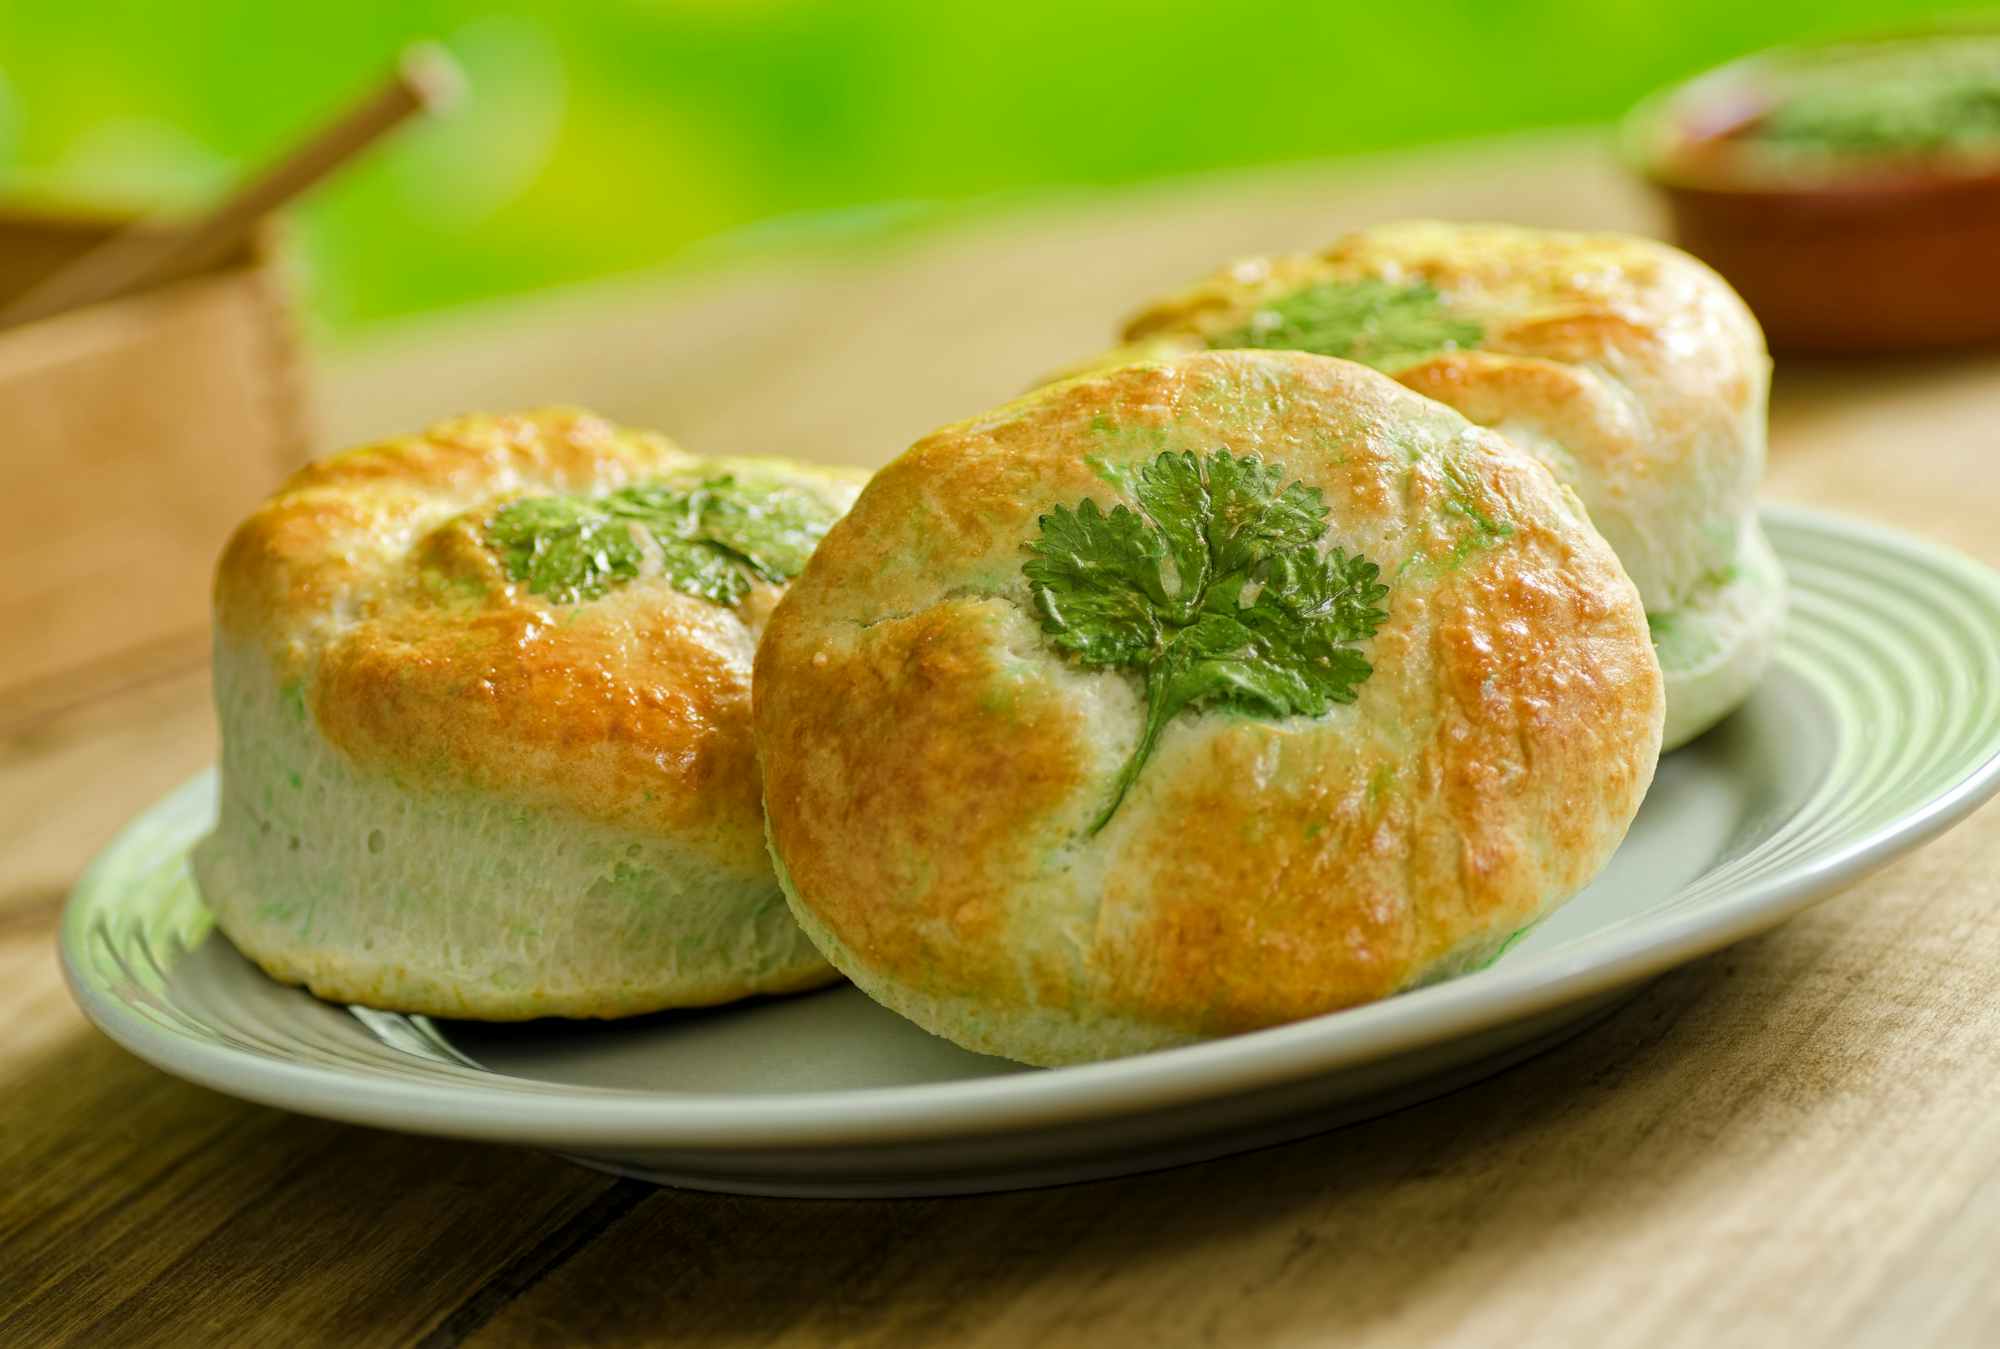 A plate of biscuits with an herb shaped like a clover baked into each one